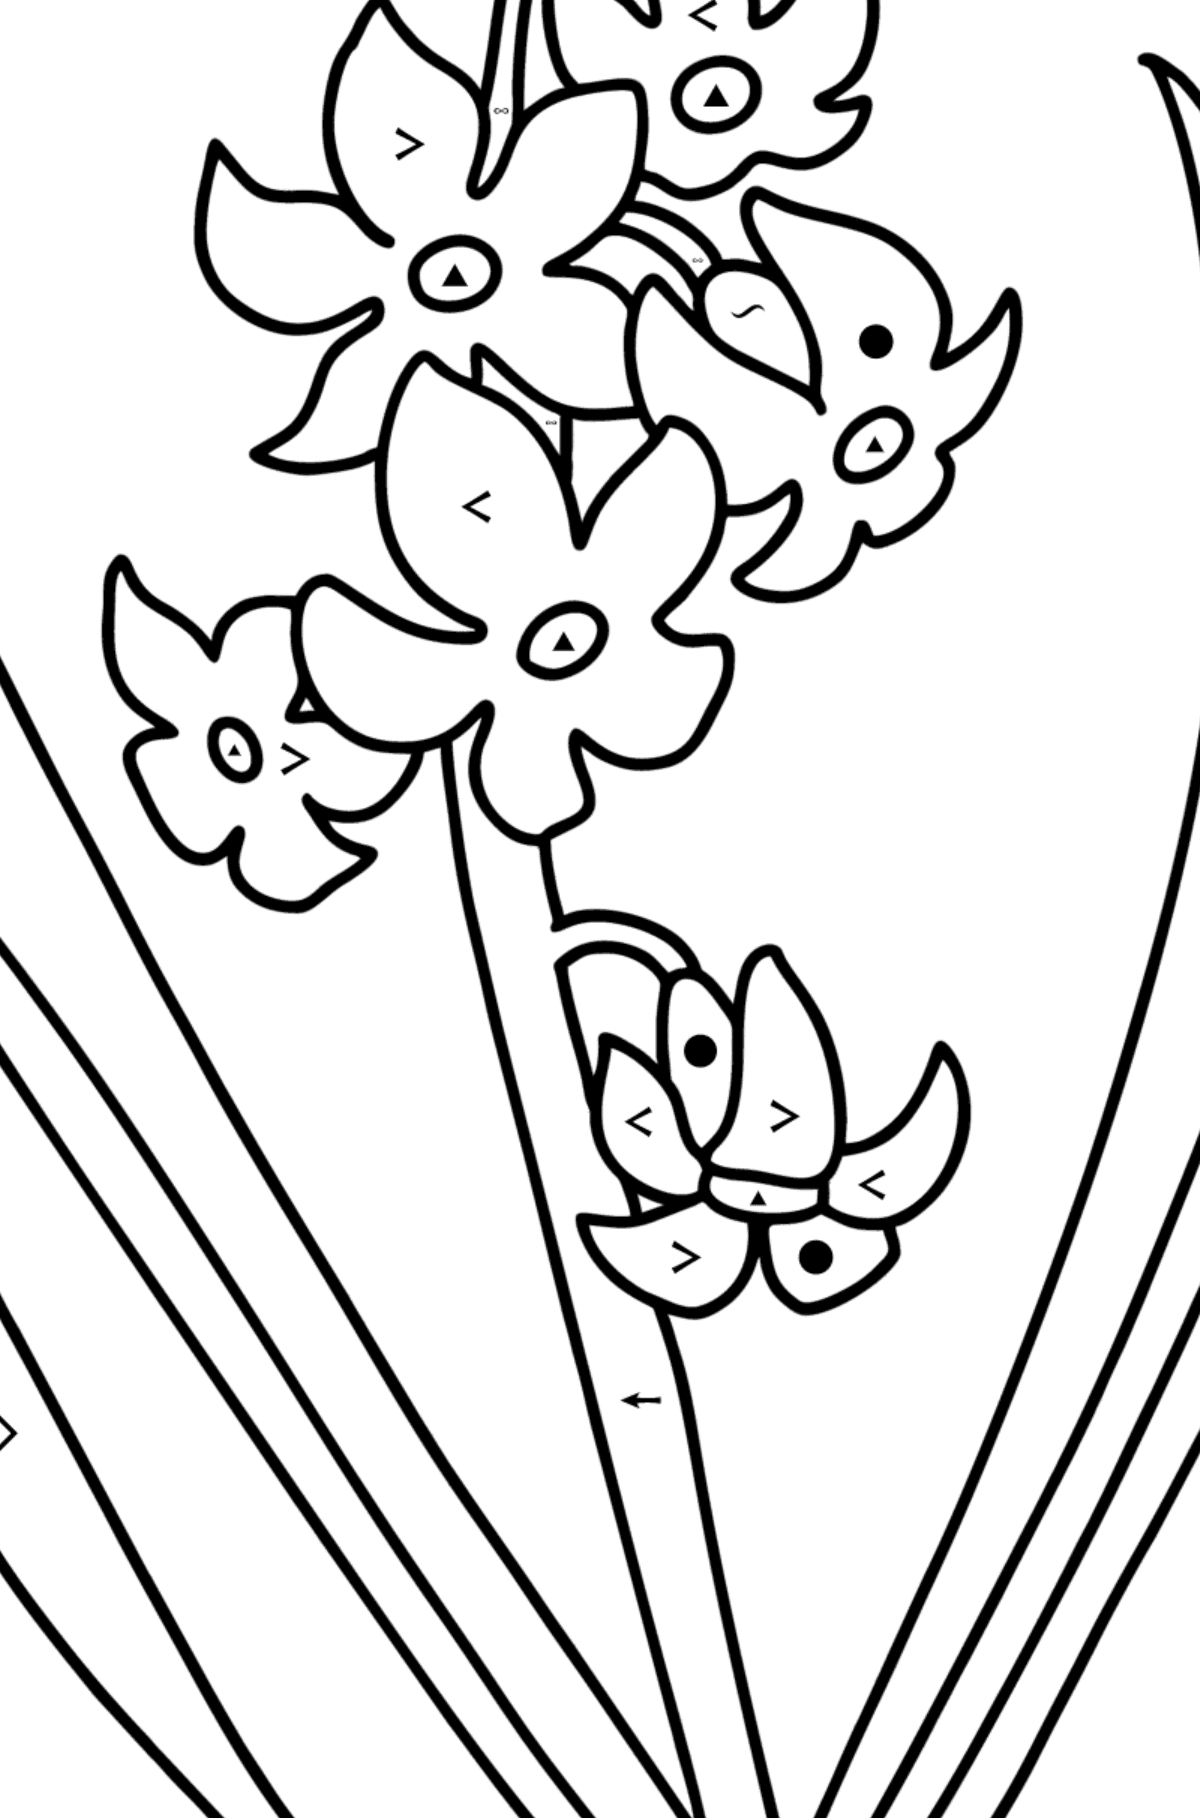 Hyacinth coloring page - Coloring by Symbols for Kids